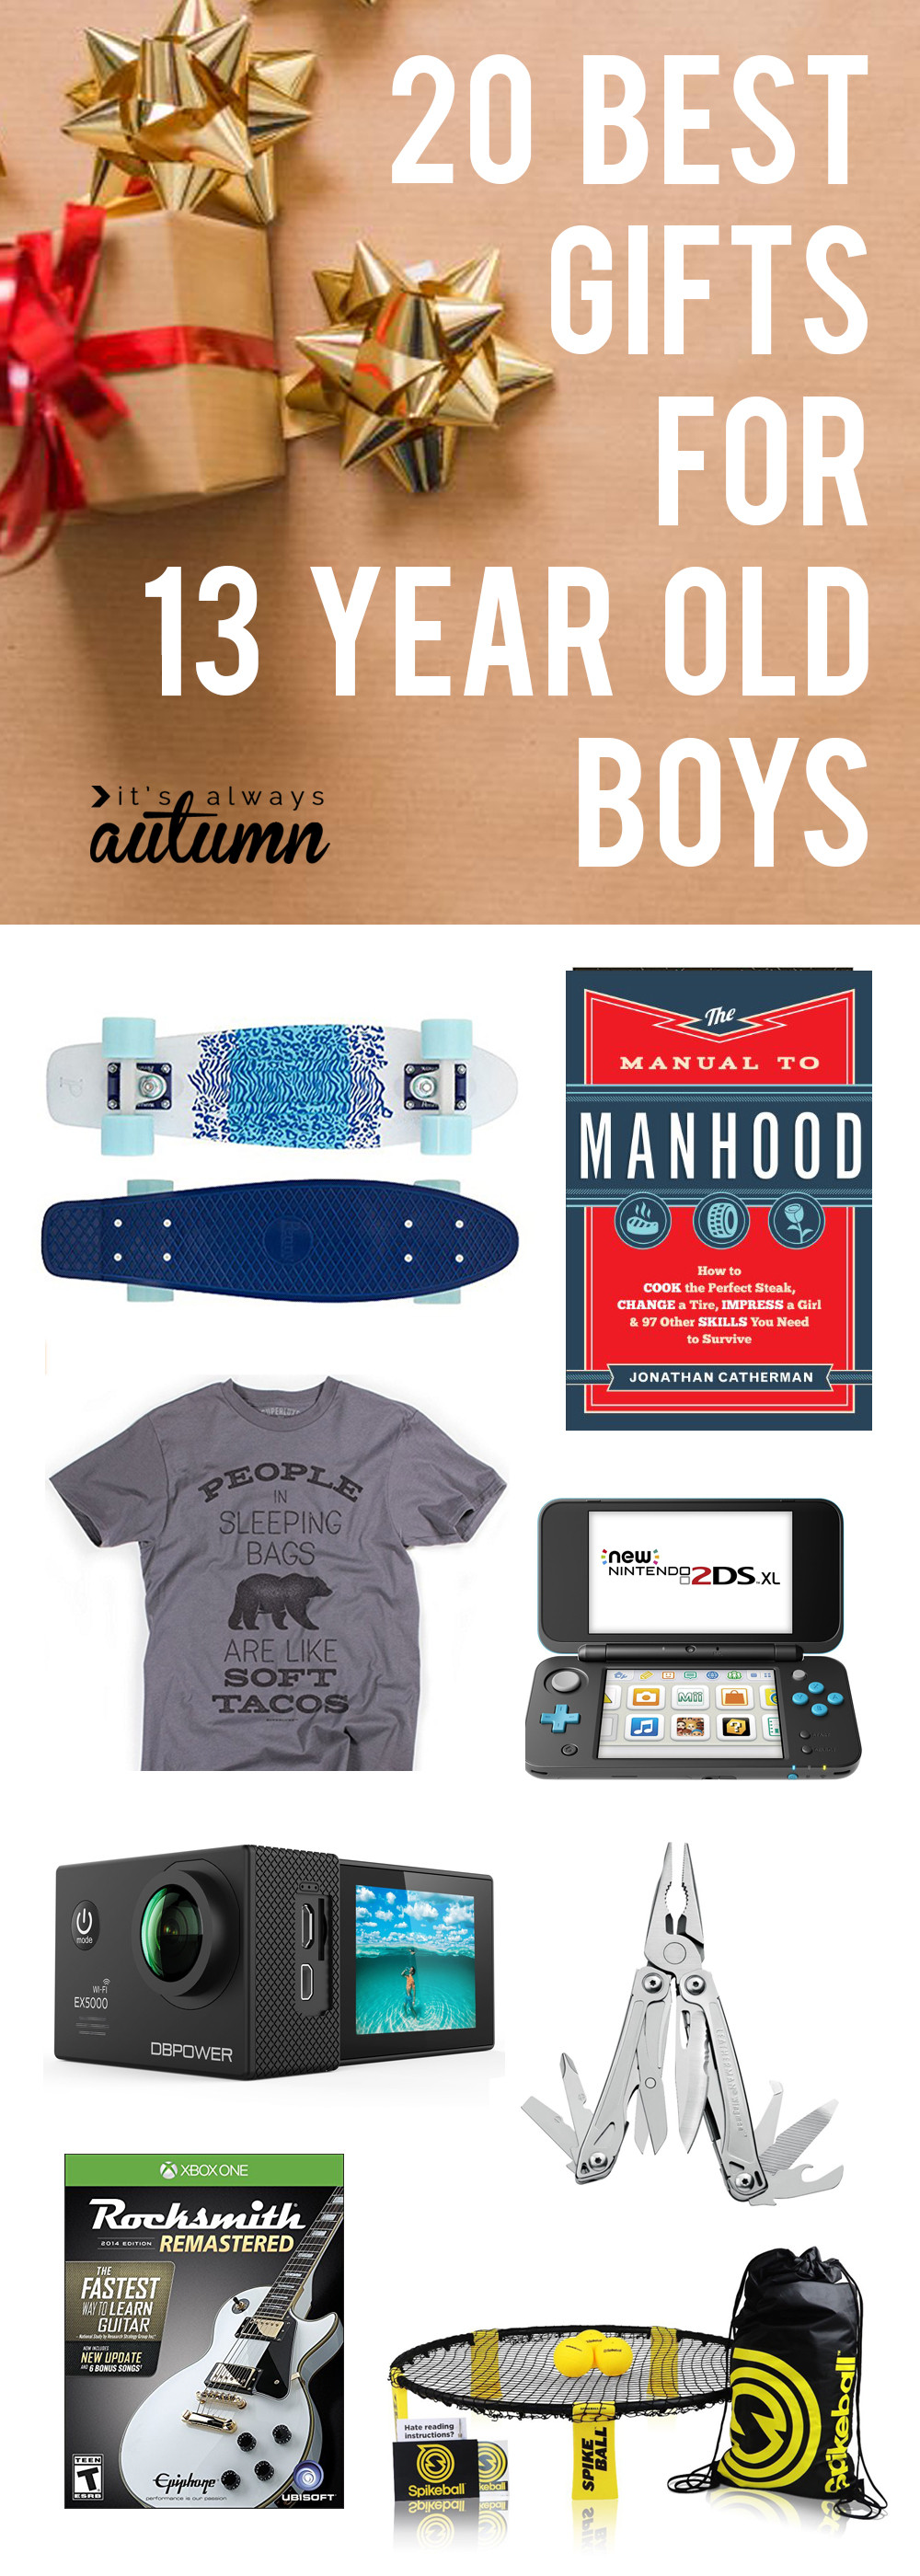 Gift Ideas For 12 Year Old Boys
 best Christmas ts for 13 year old boys It s Always Autumn